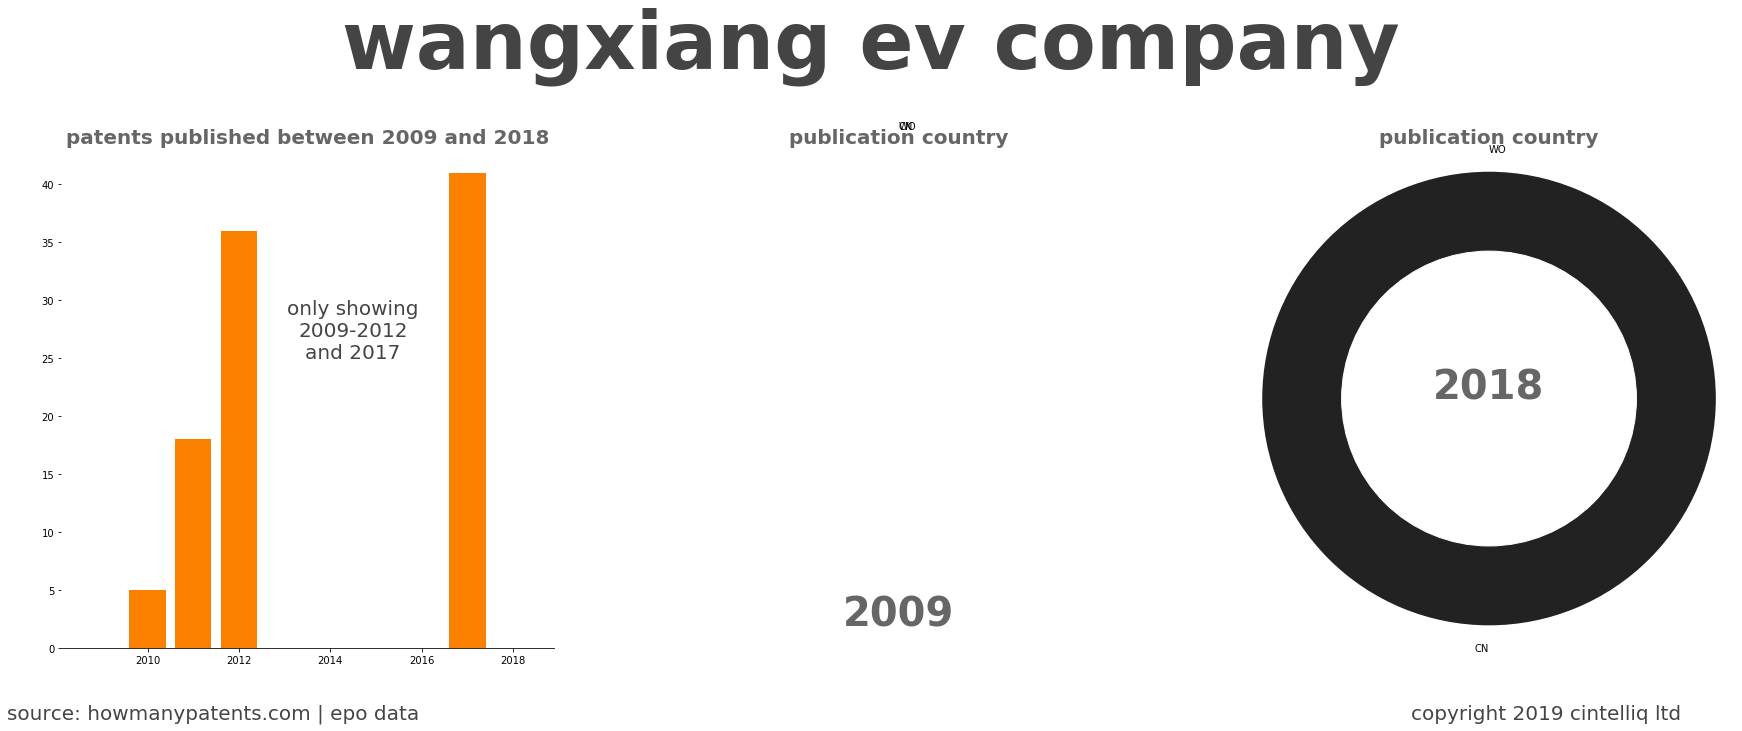 summary of patents for Wangxiang Ev Company